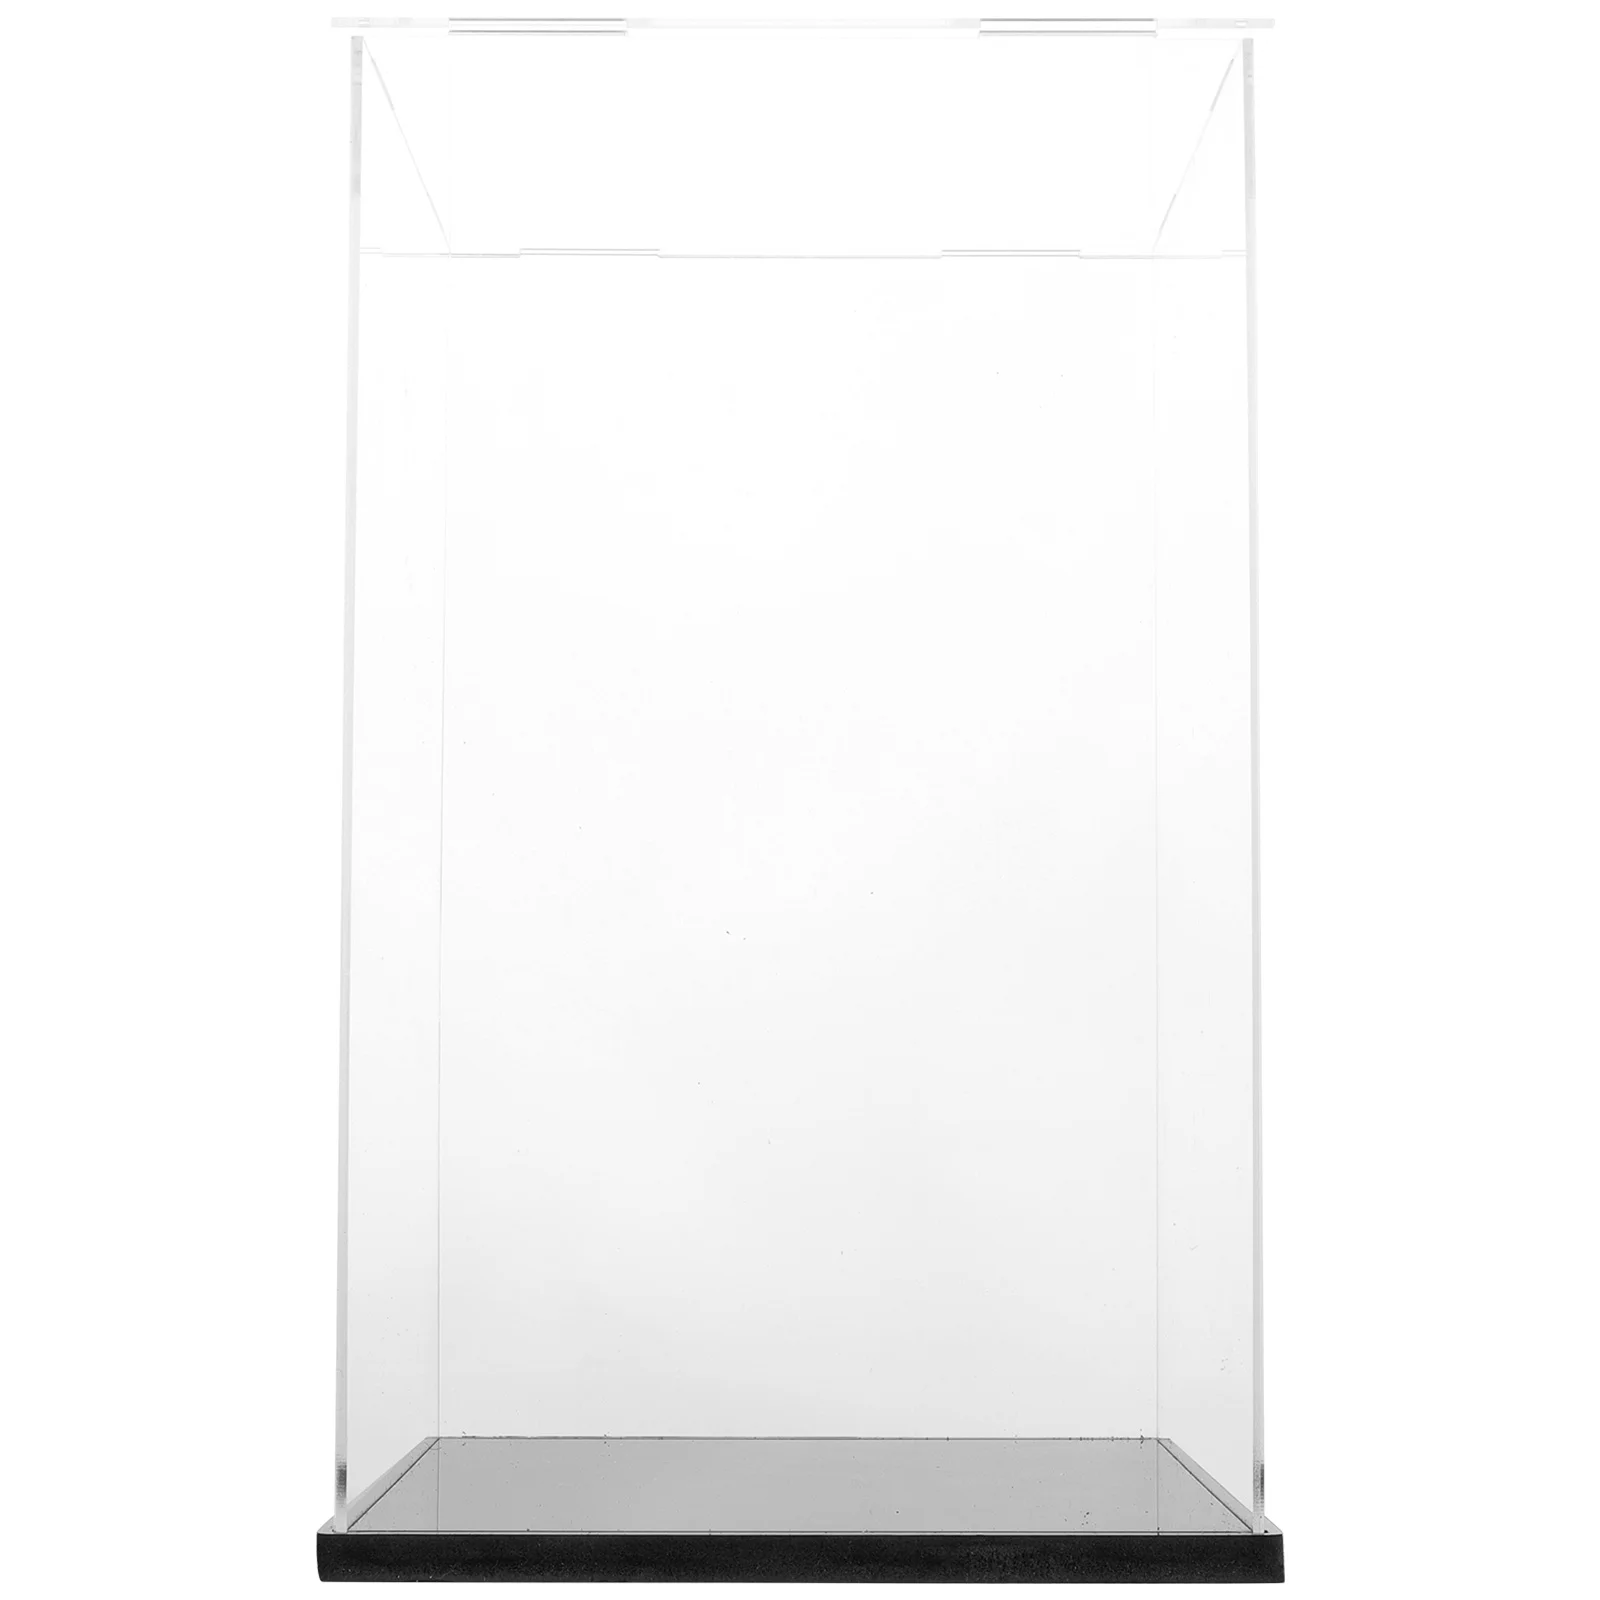 

Display Box Case Clear Figure Model Statue Toy Figurine Cabinet Rack Action Figures Storage Showcase Exhibition Collection Stand